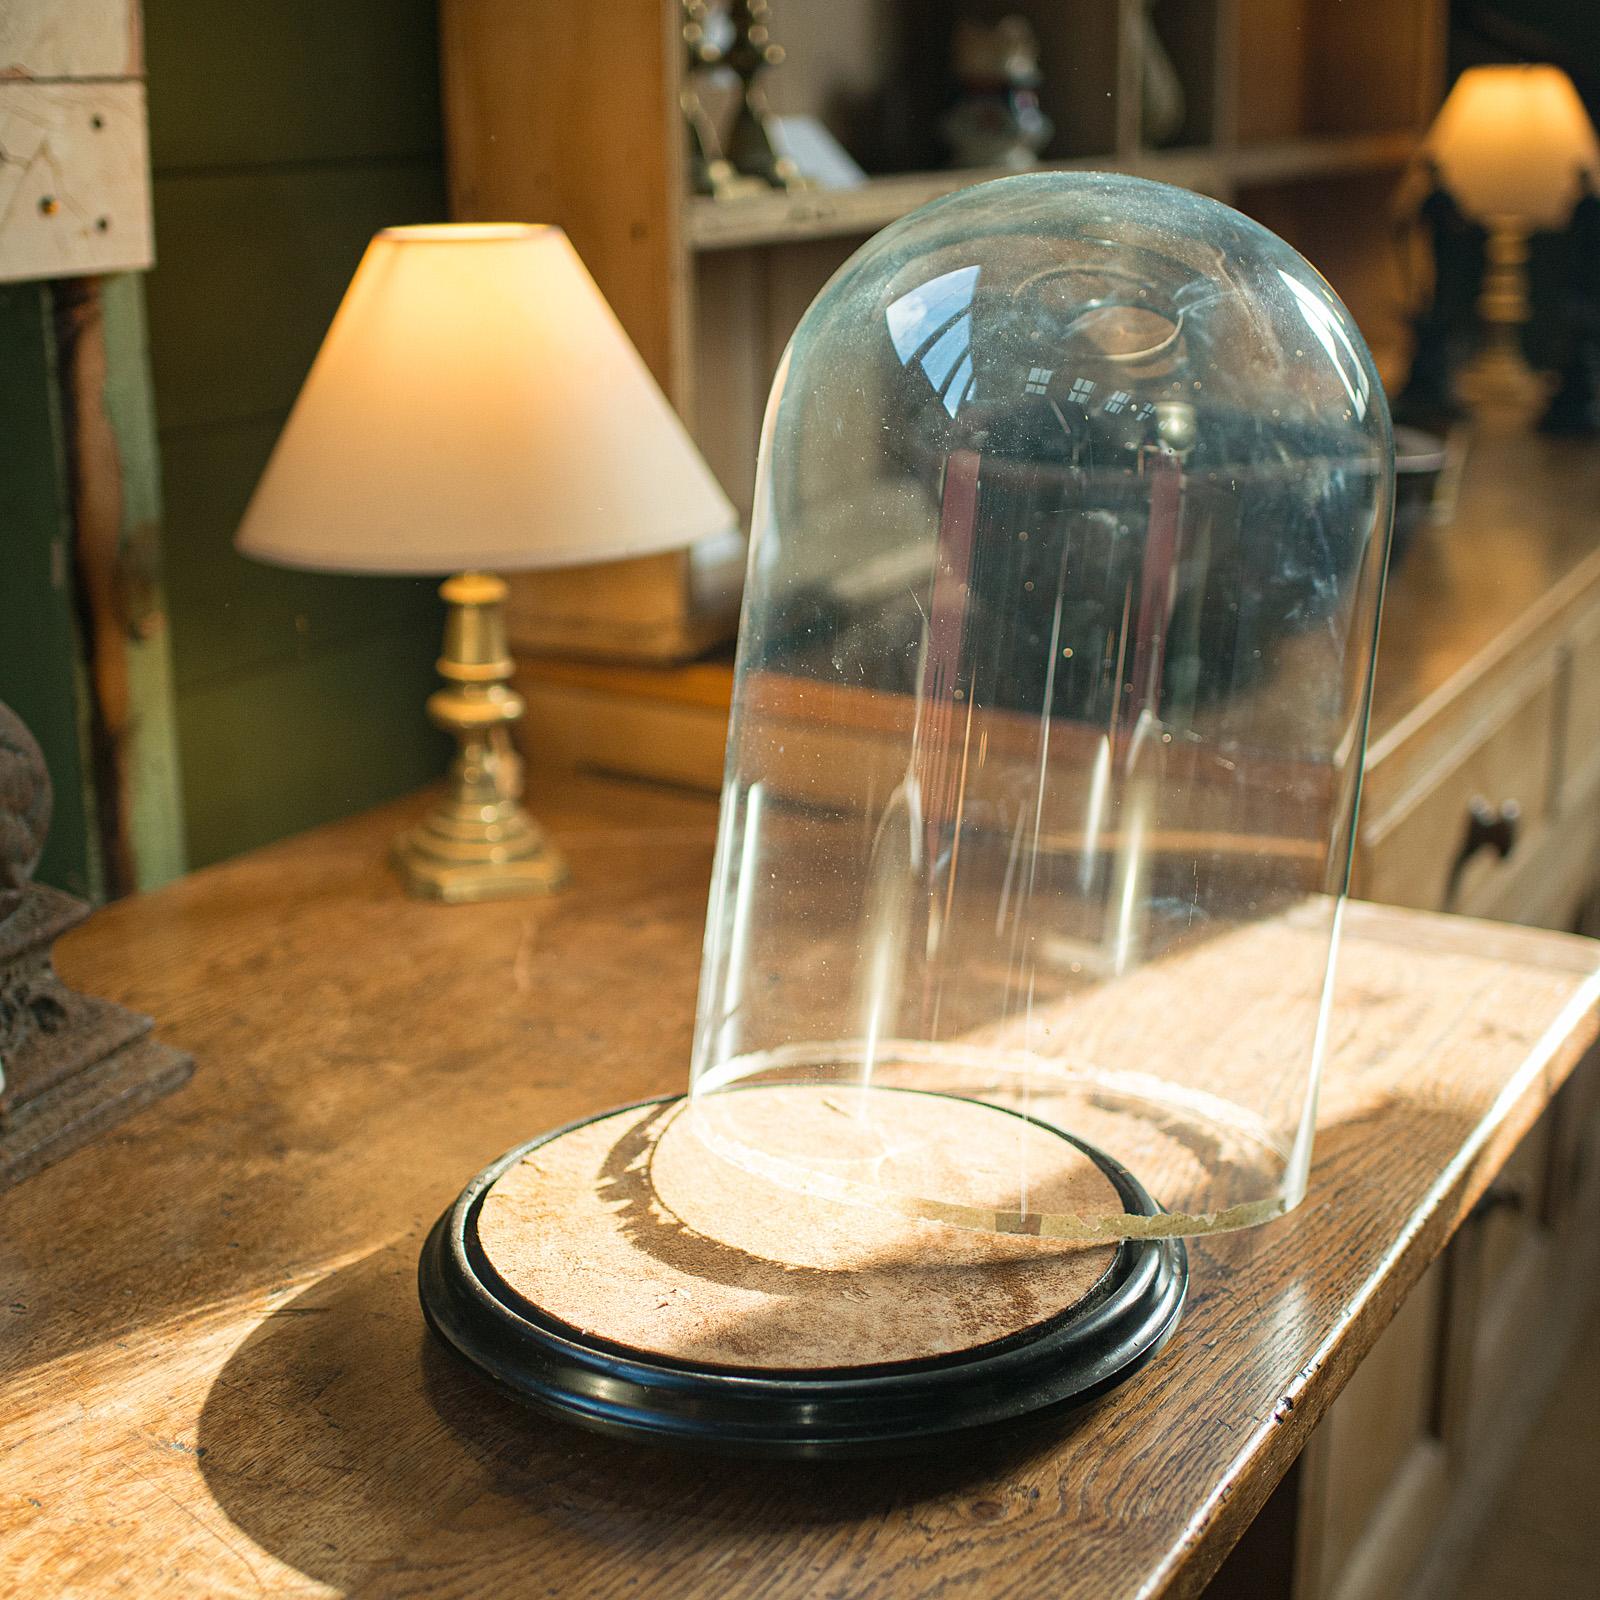 Large Antique Taxidermy Dome, English, Display Showcase, Late Victorian, C.1880 In Good Condition For Sale In Hele, Devon, GB